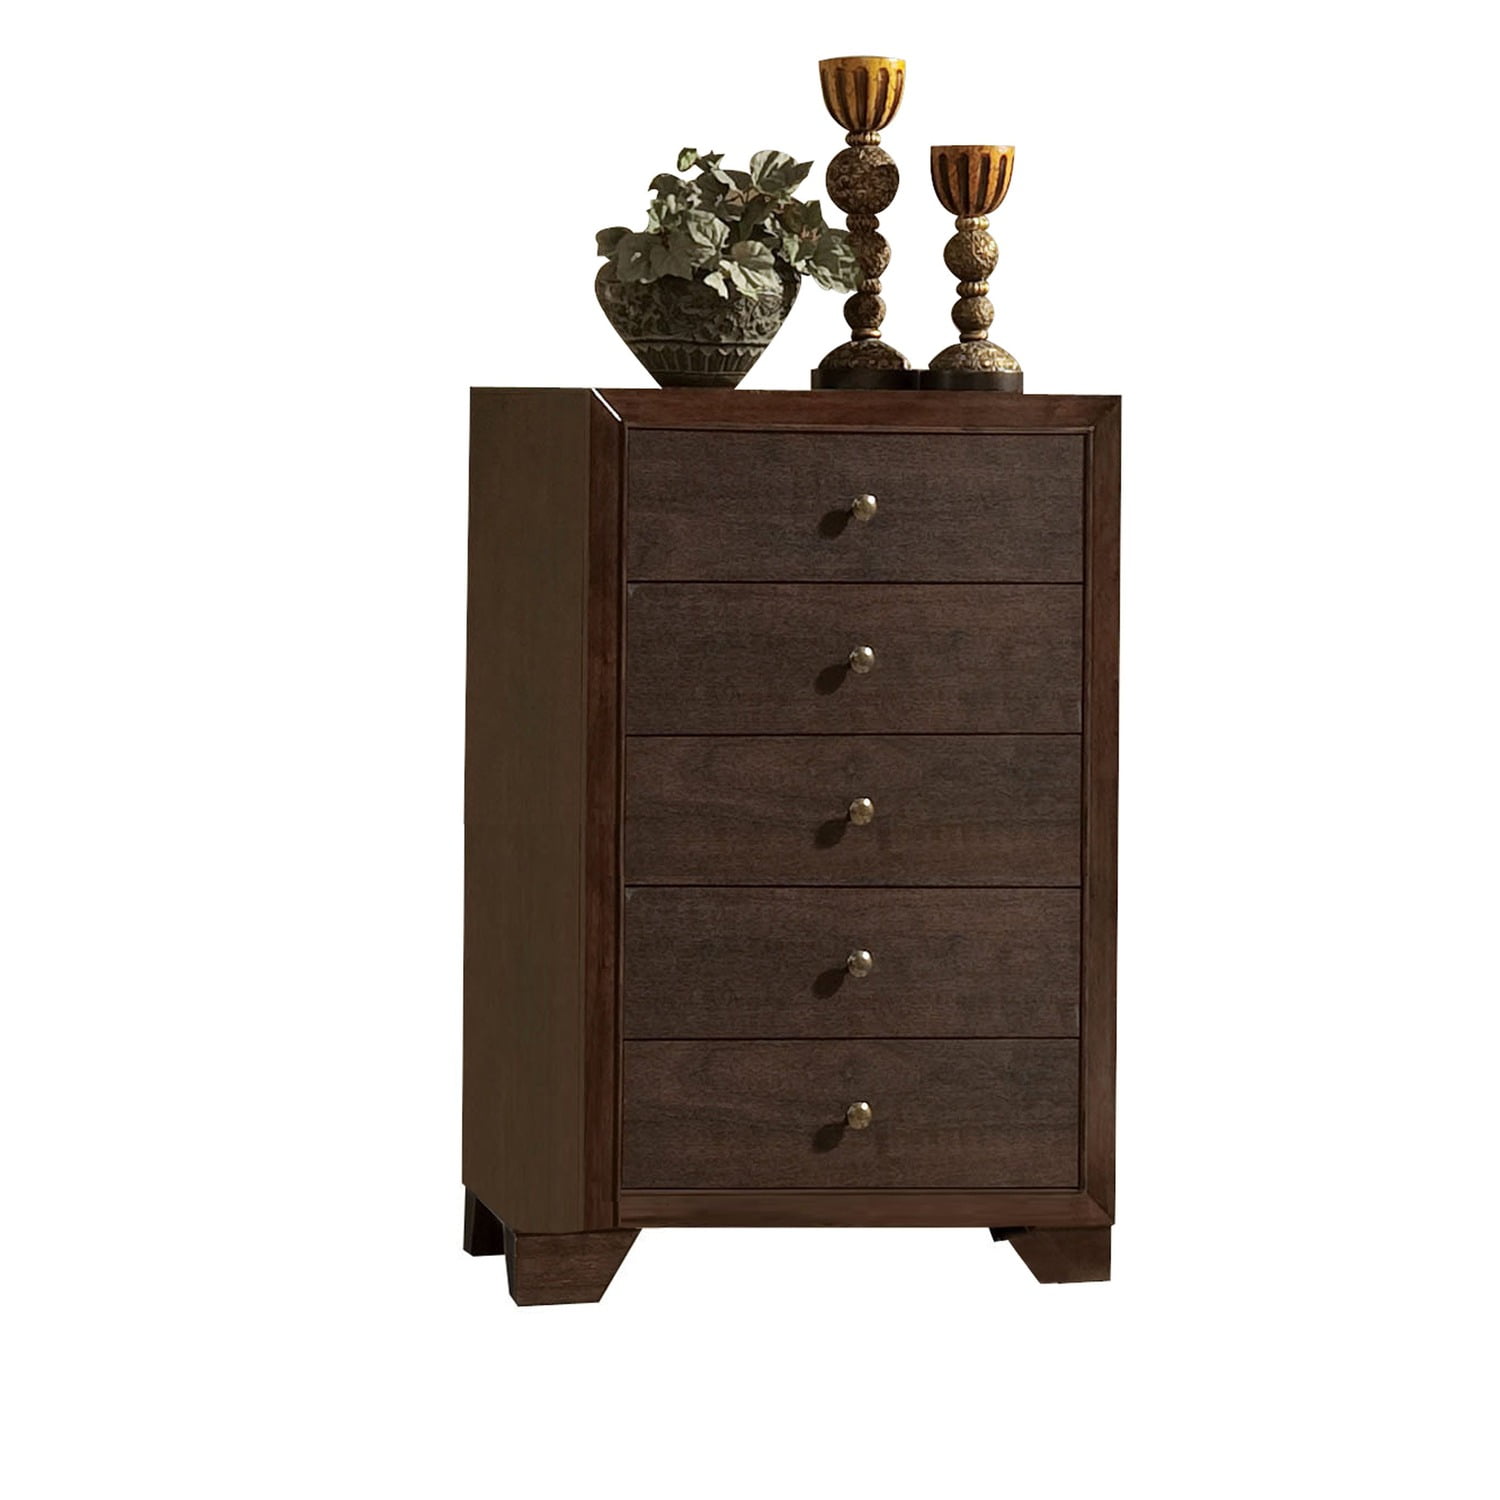 Bm177804 Wooden Chest With 5 Spacious Drawers, Espresso Brown - 47.28 X 16.38 X 30.51 In.